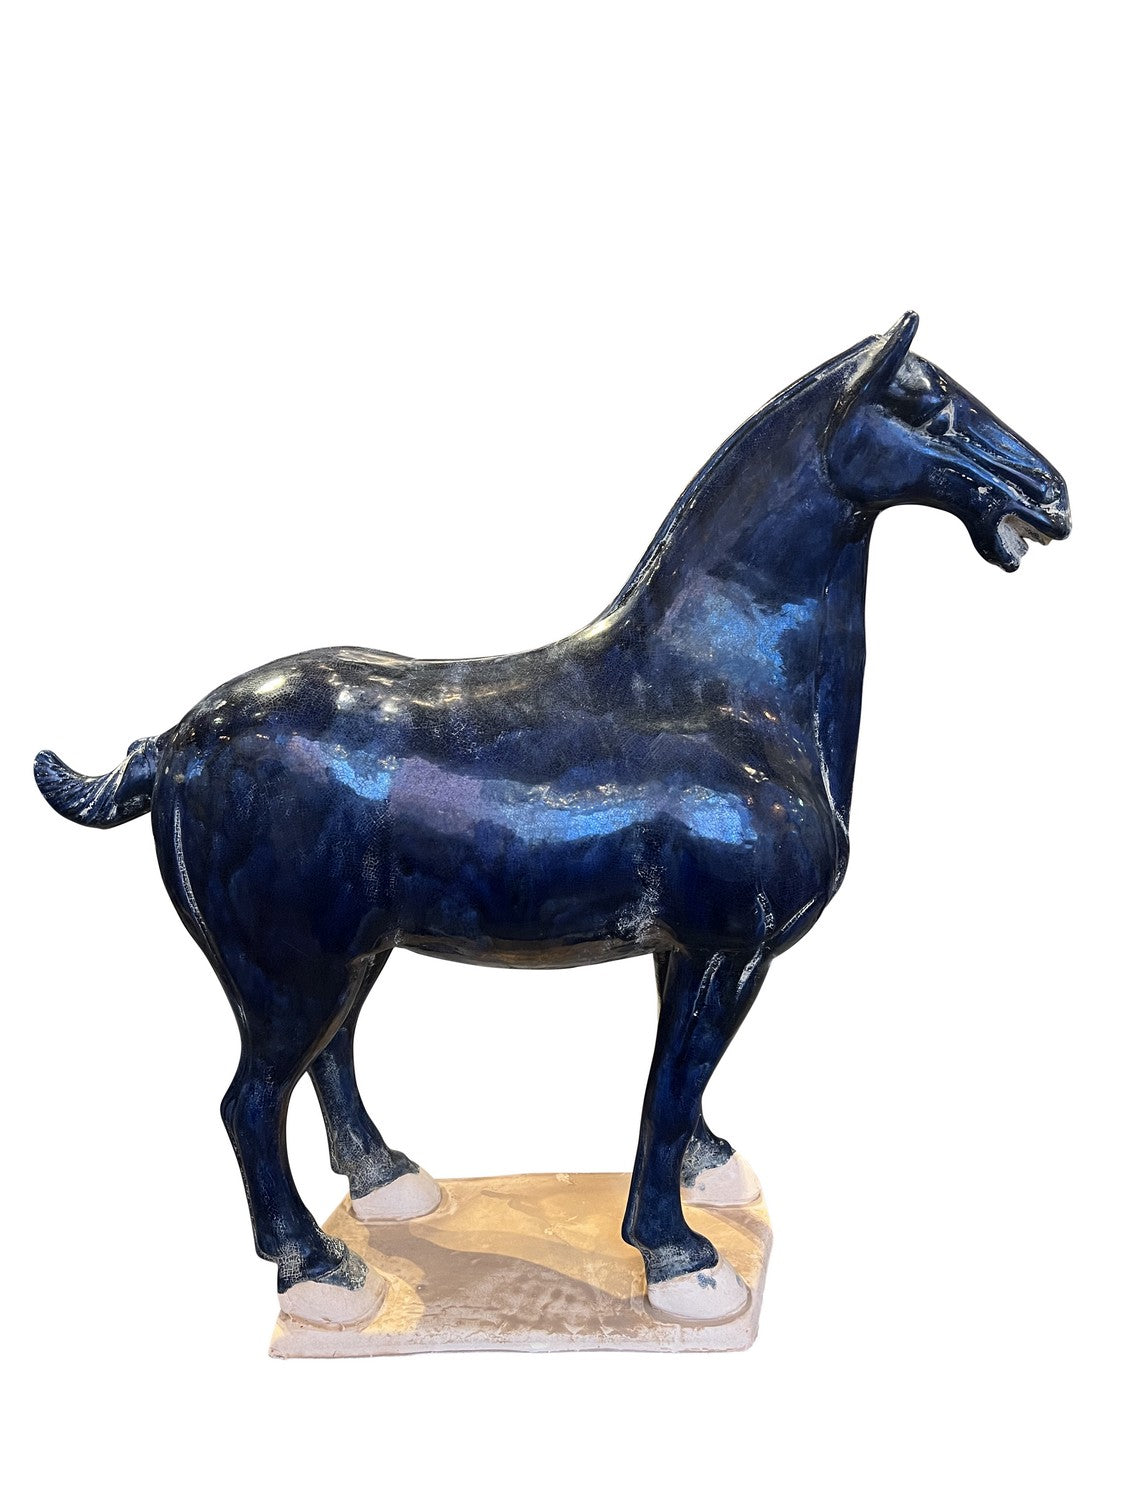 Currey and Company - 1200-0781 - Sculpture - Blue